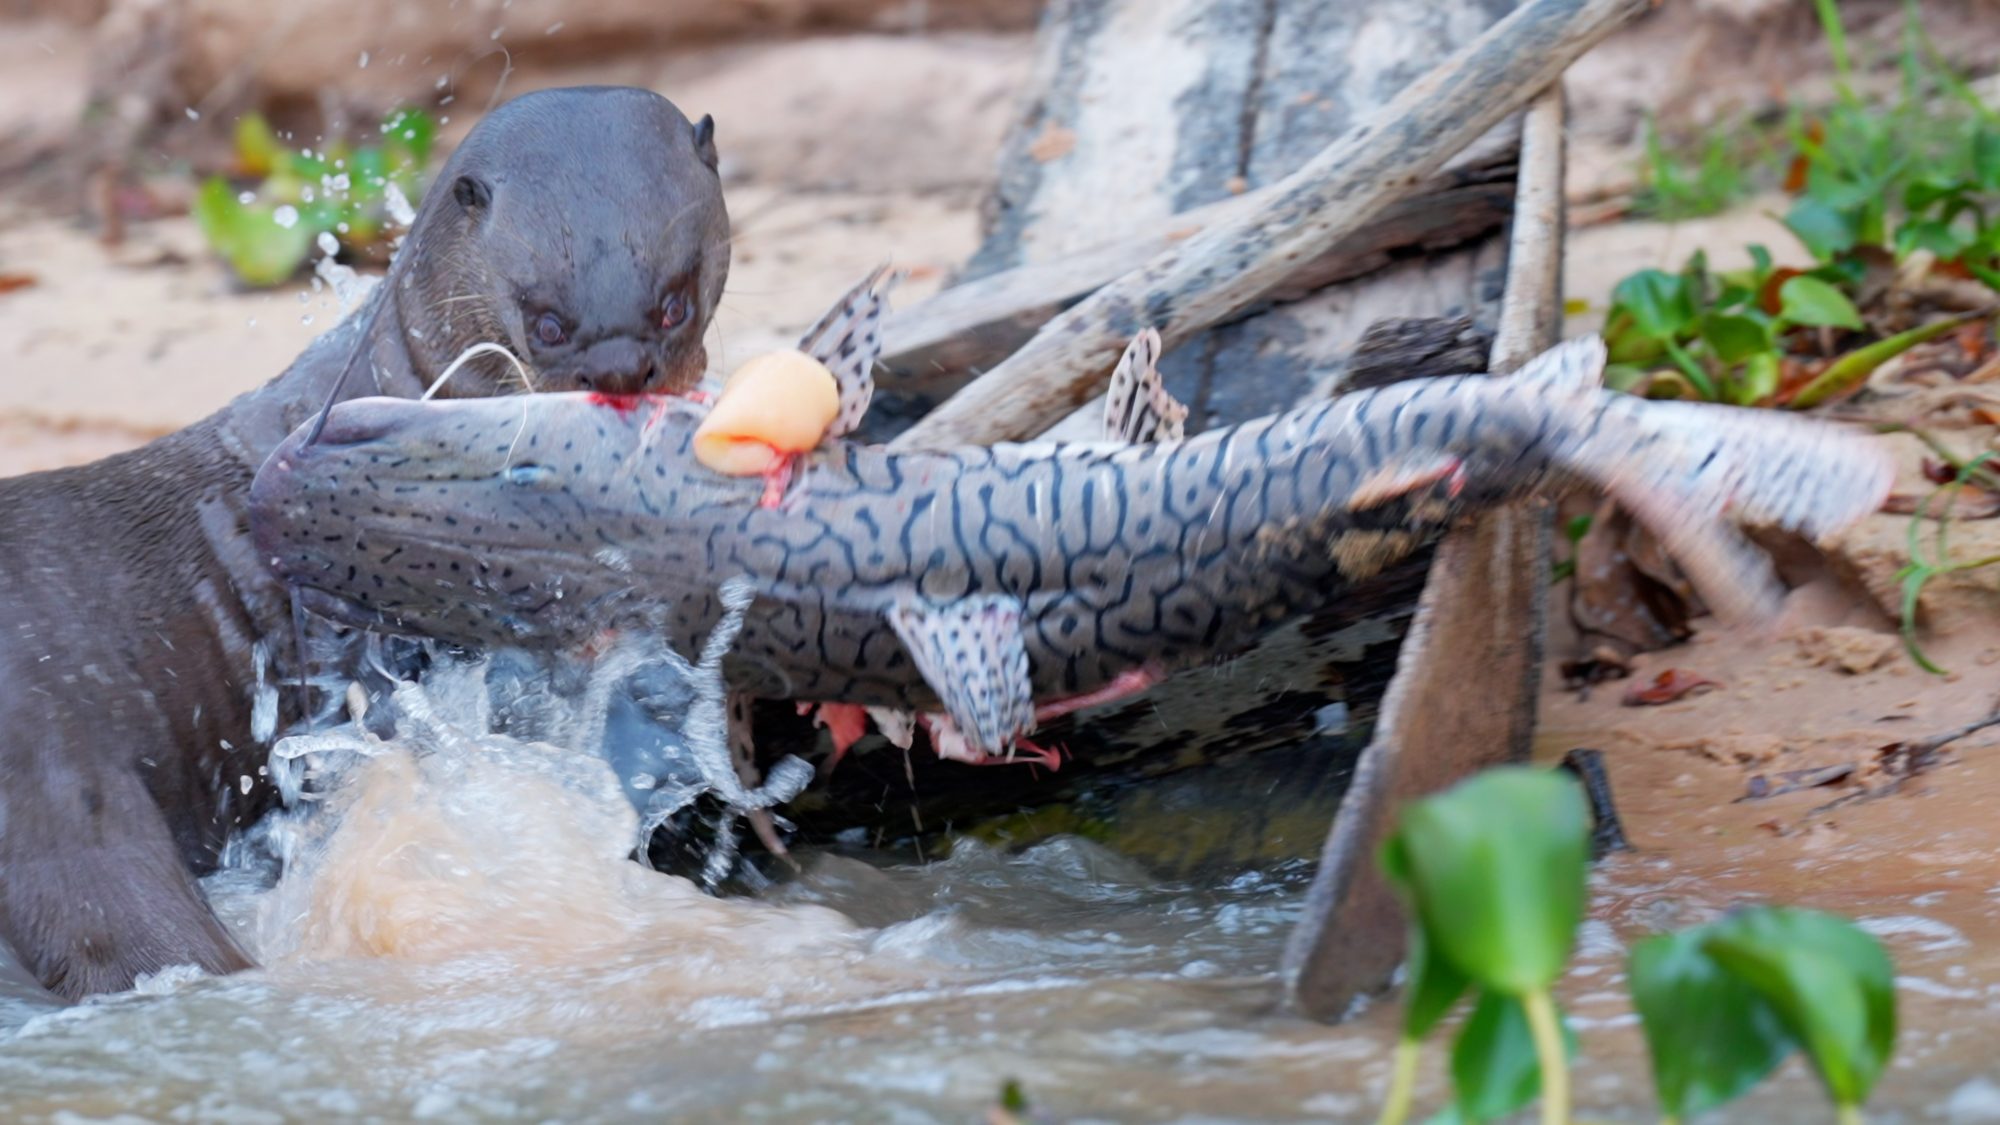 Giant River Otters with an enormous Tiger Catfish – Pantanal, Brazil 2022